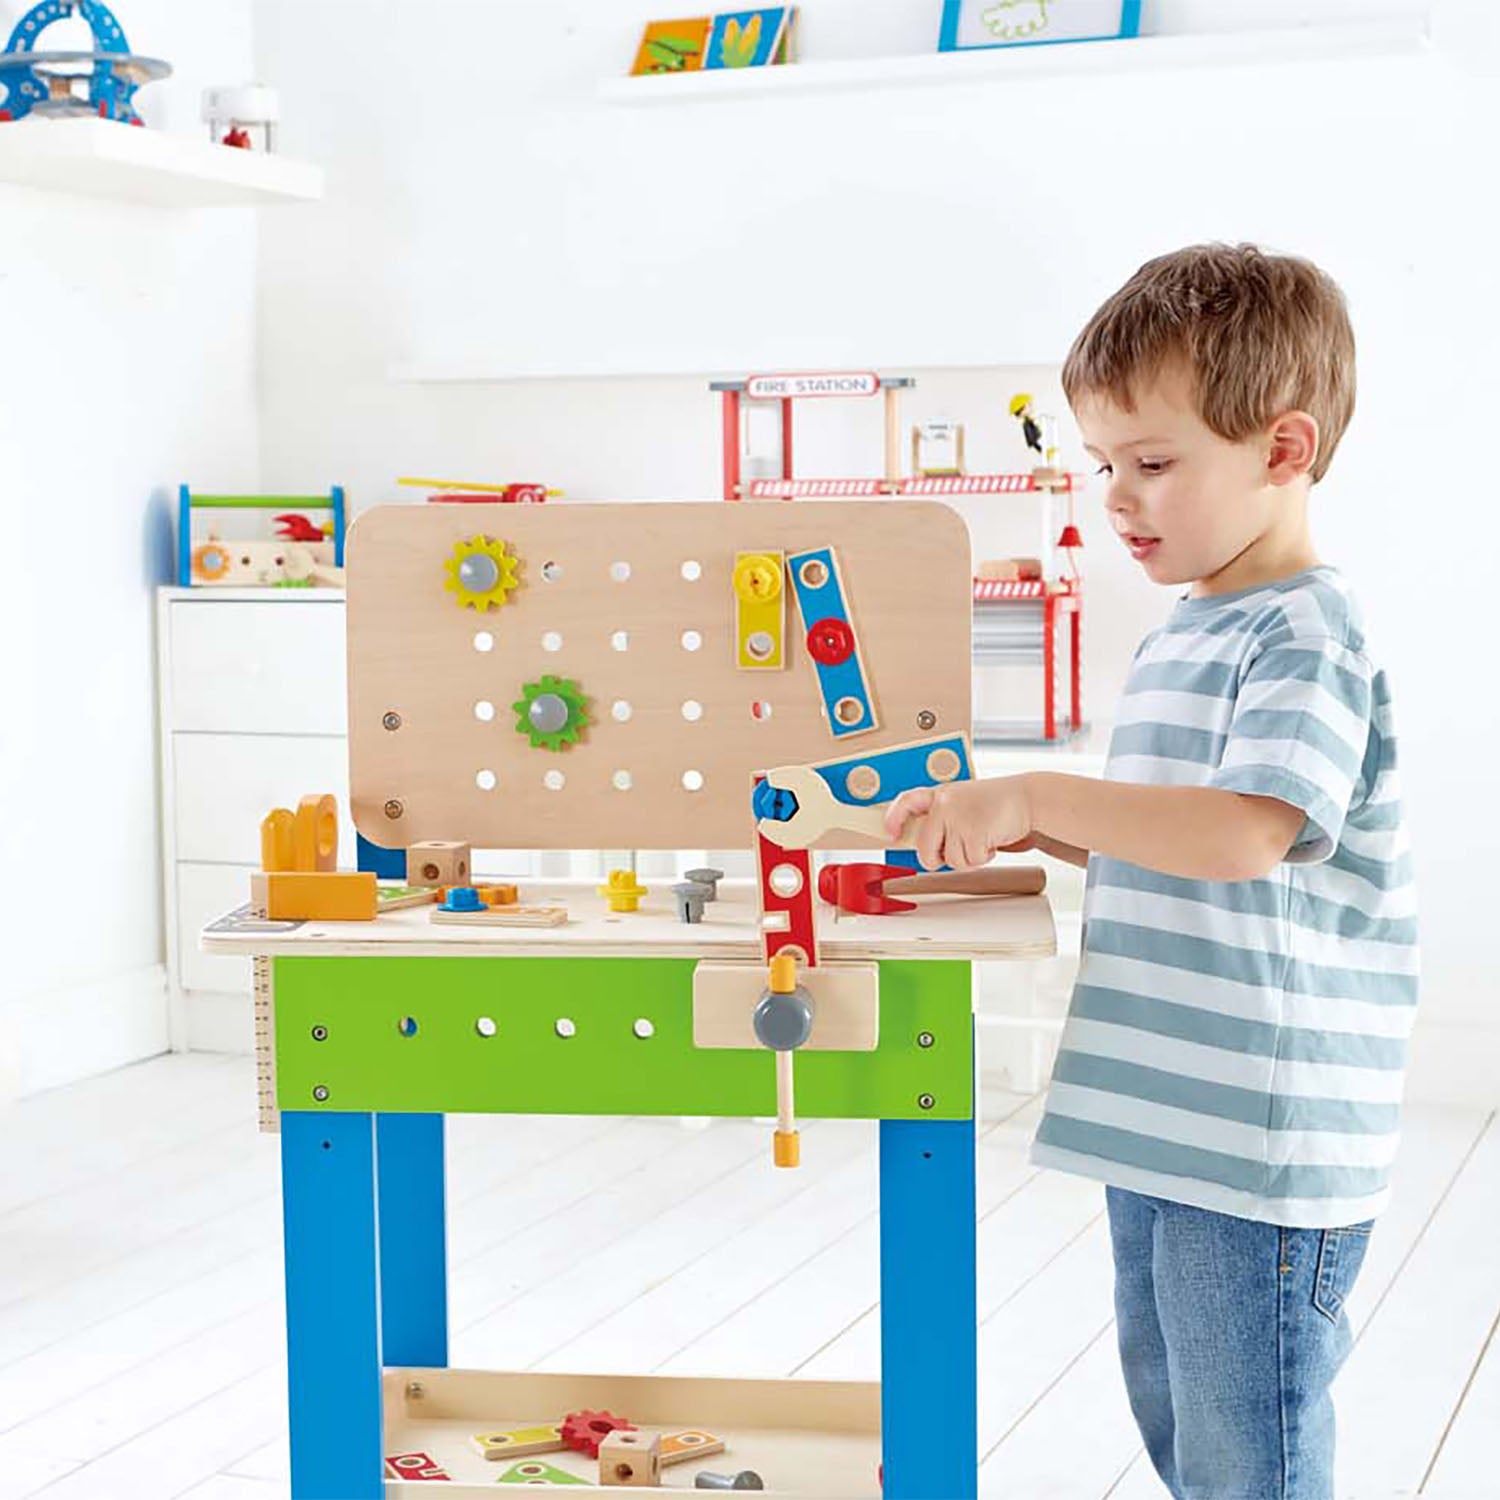 Hape Master Workbench imaginative play quality wooden toys The Toy Wagon